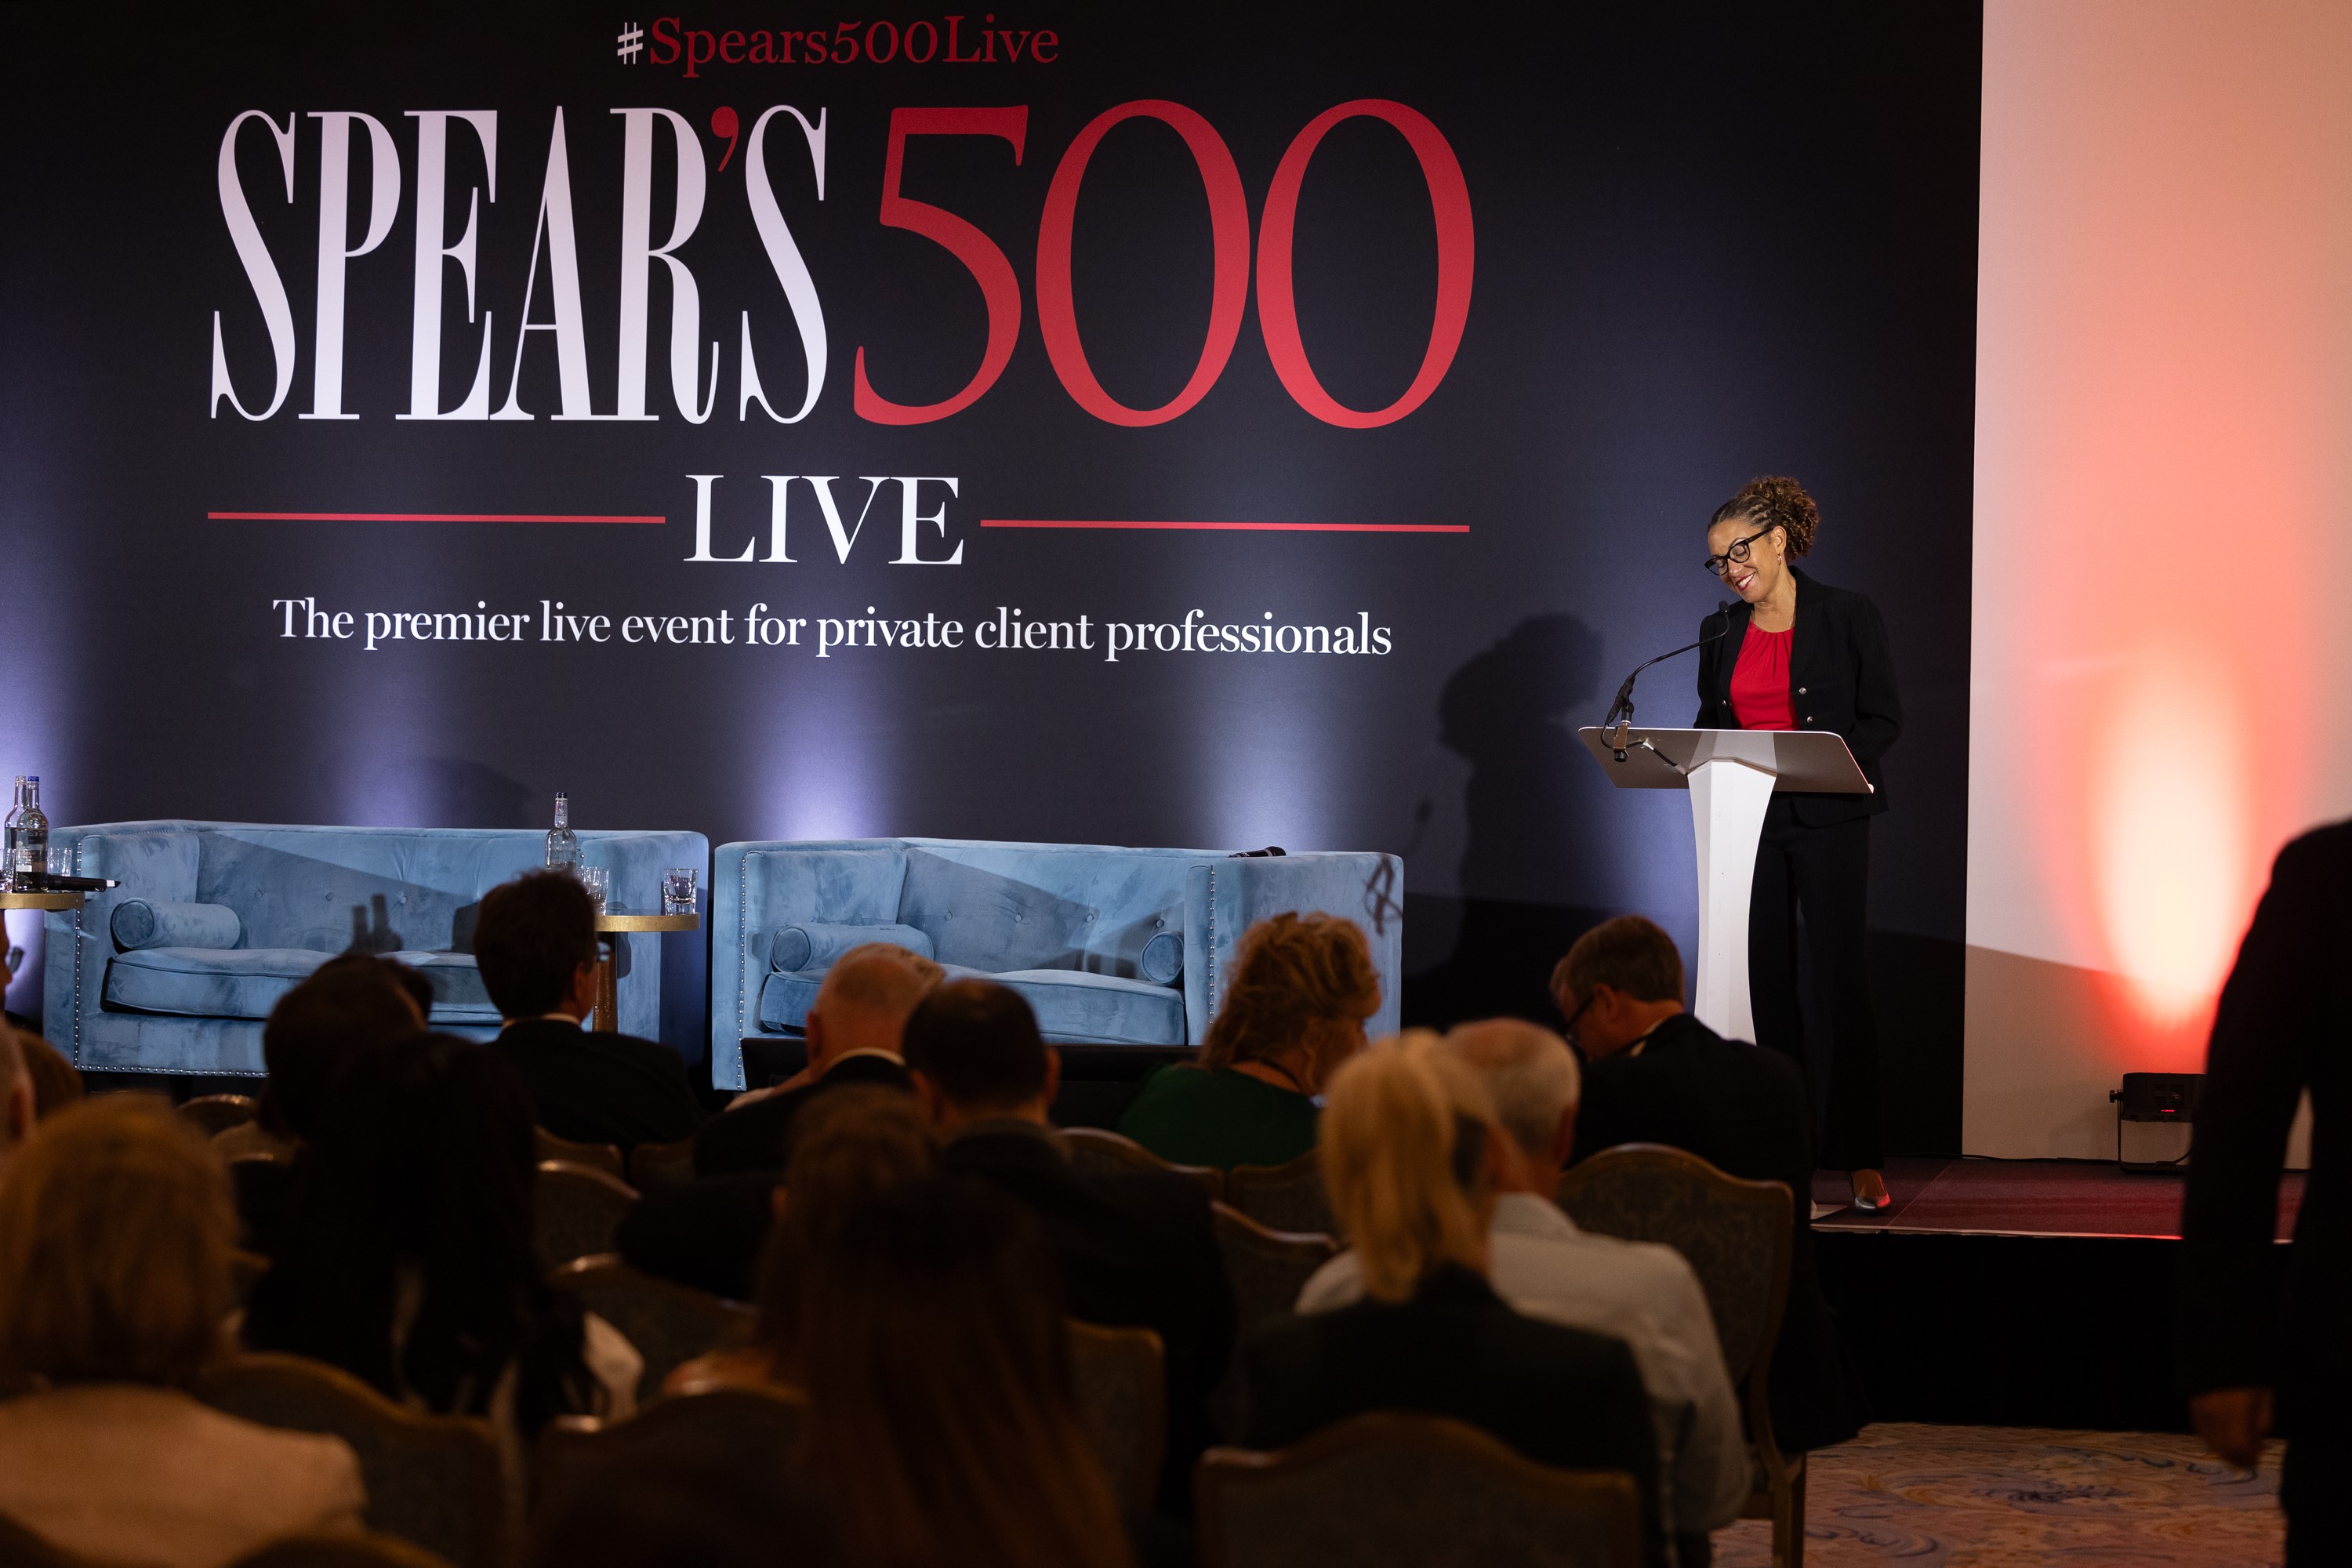 BVI FINANCE SHOWCASES WEALTH MANAGEMEMENT SOLUTIONS AND CRYPTO HEDGE FUND DOMINANCE AT SPEARS 500